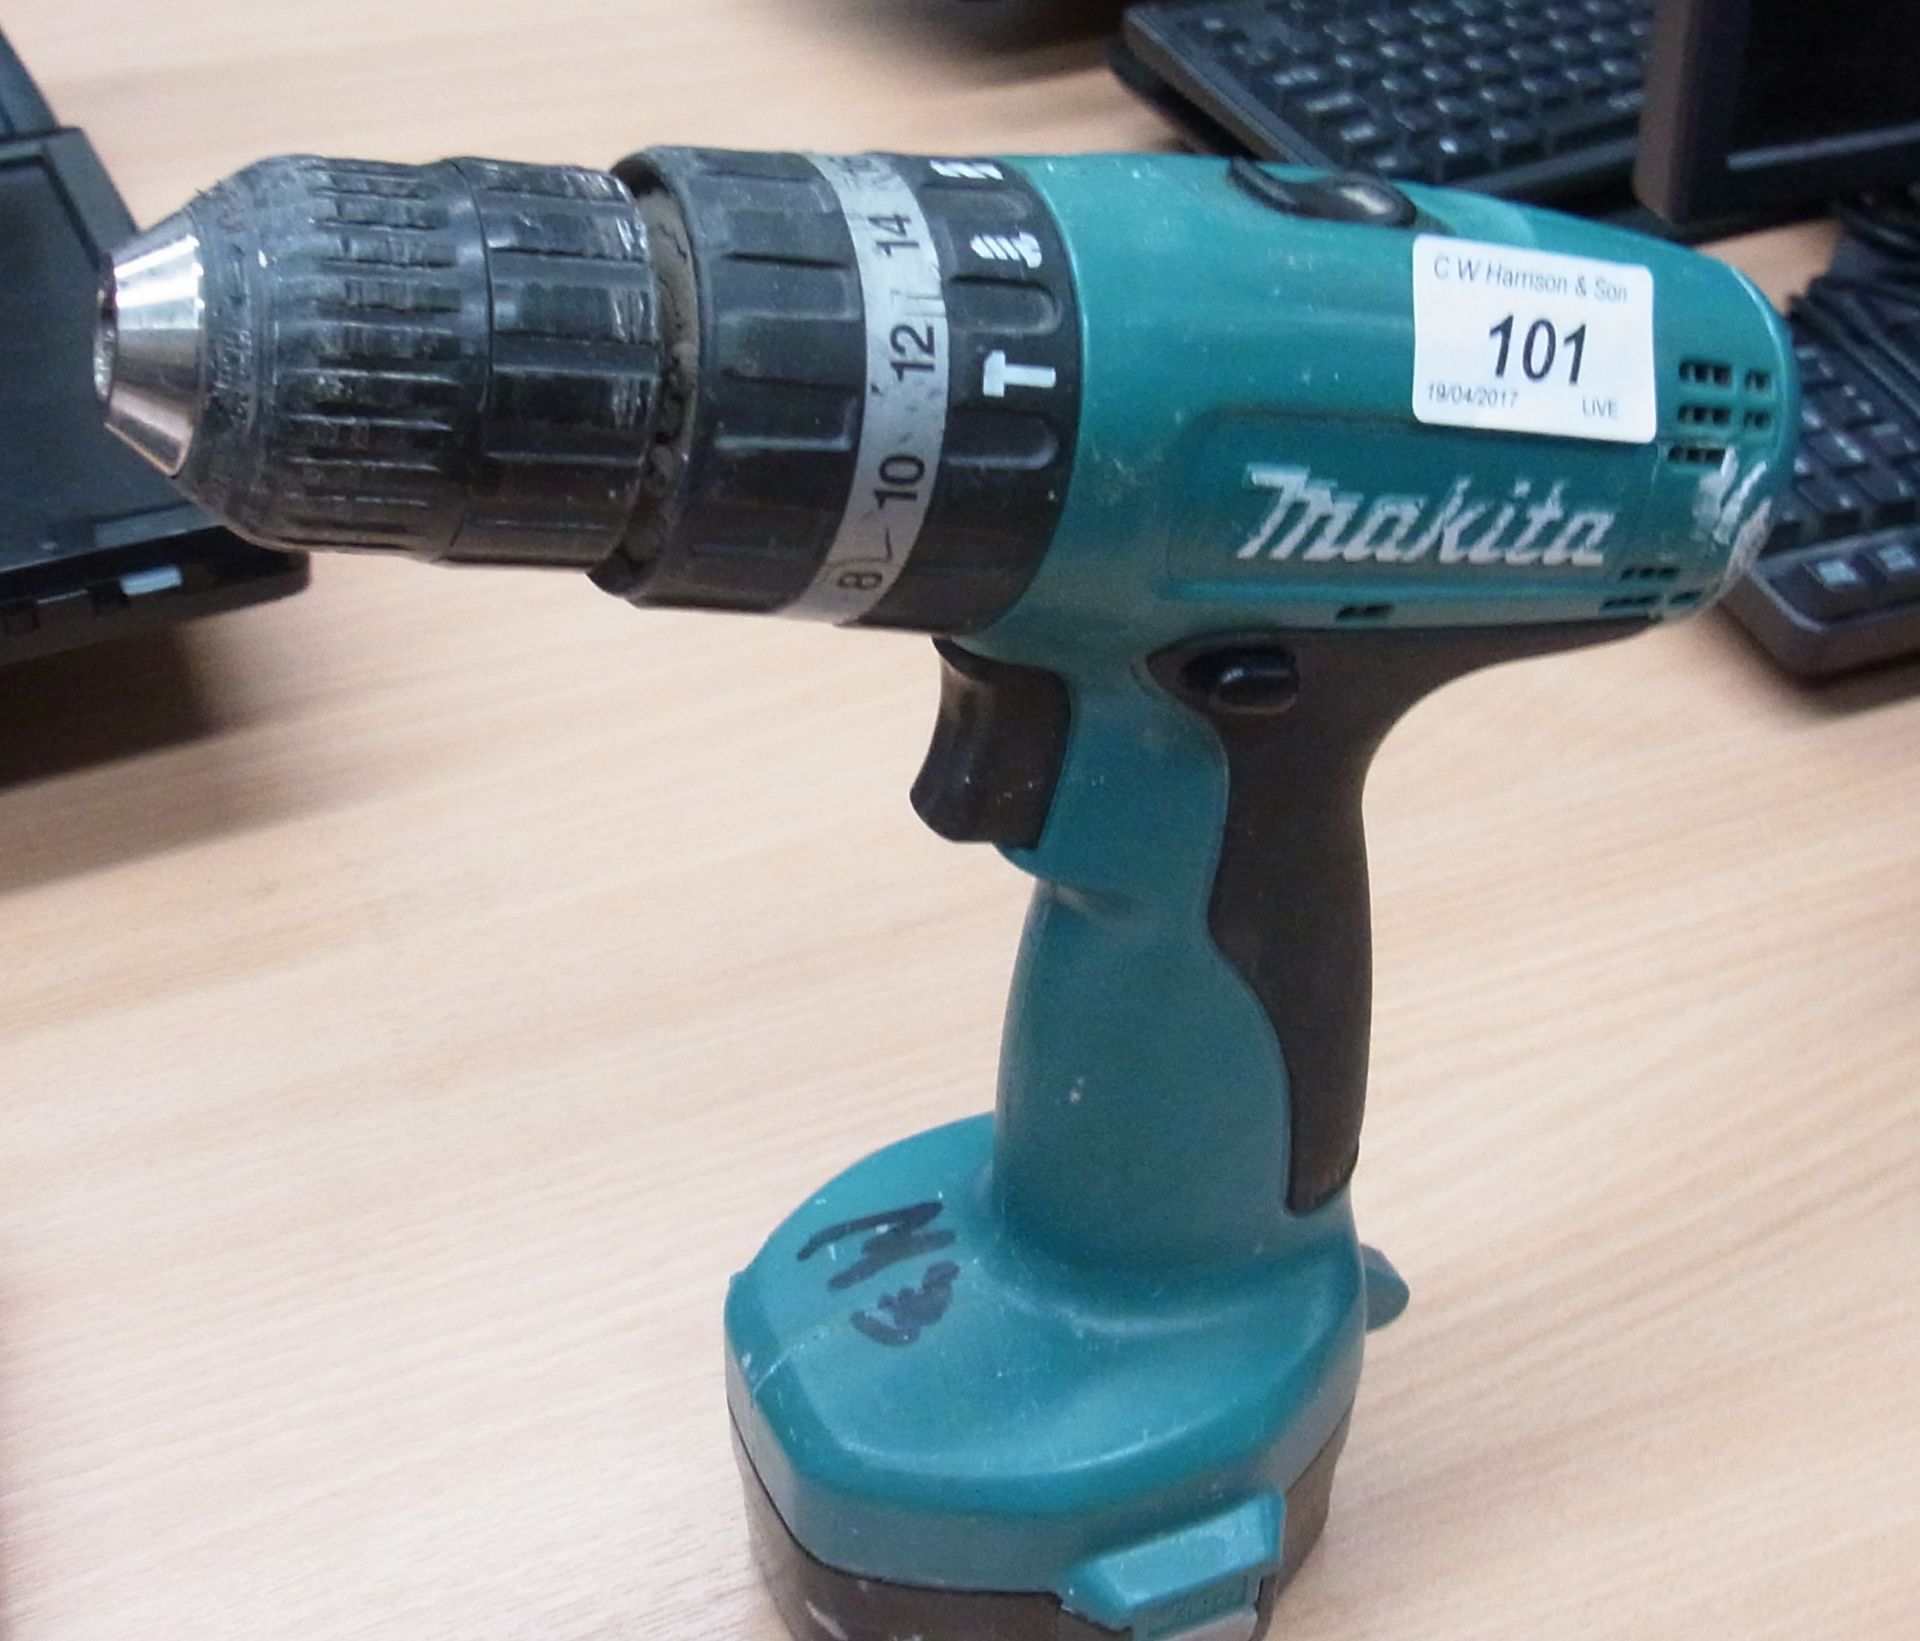 A Makita 8280D cordless drill complete with 1 x battery - no charger